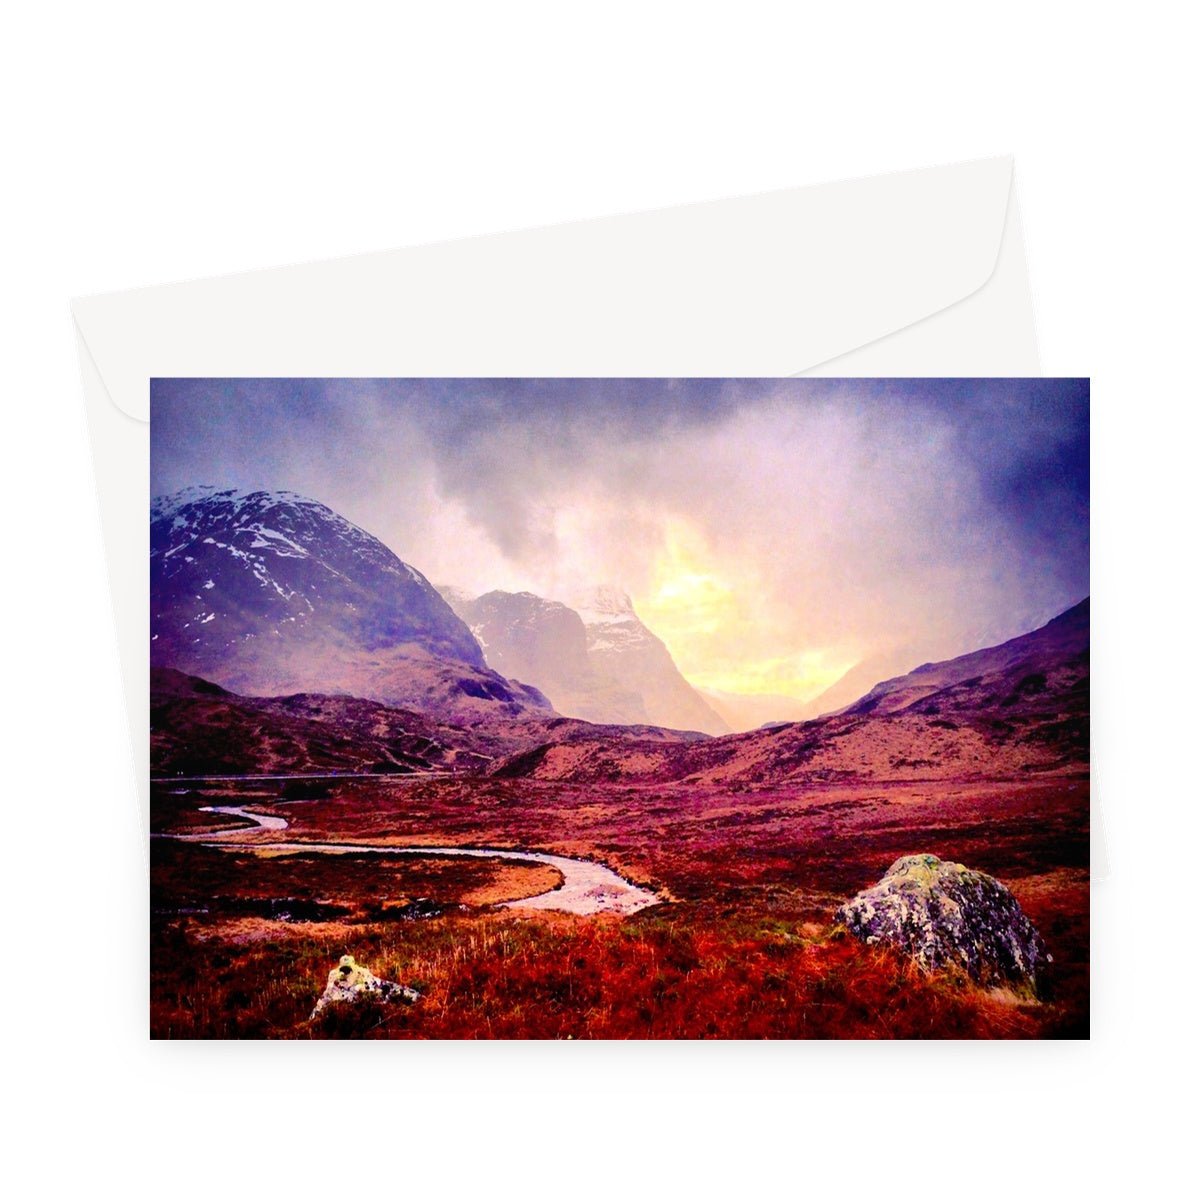 A Brooding Glencoe Art Gifts Greeting Card-Greetings Cards-Glencoe Art Gallery-A5 Landscape-10 Cards-Paintings, Prints, Homeware, Art Gifts From Scotland By Scottish Artist Kevin Hunter